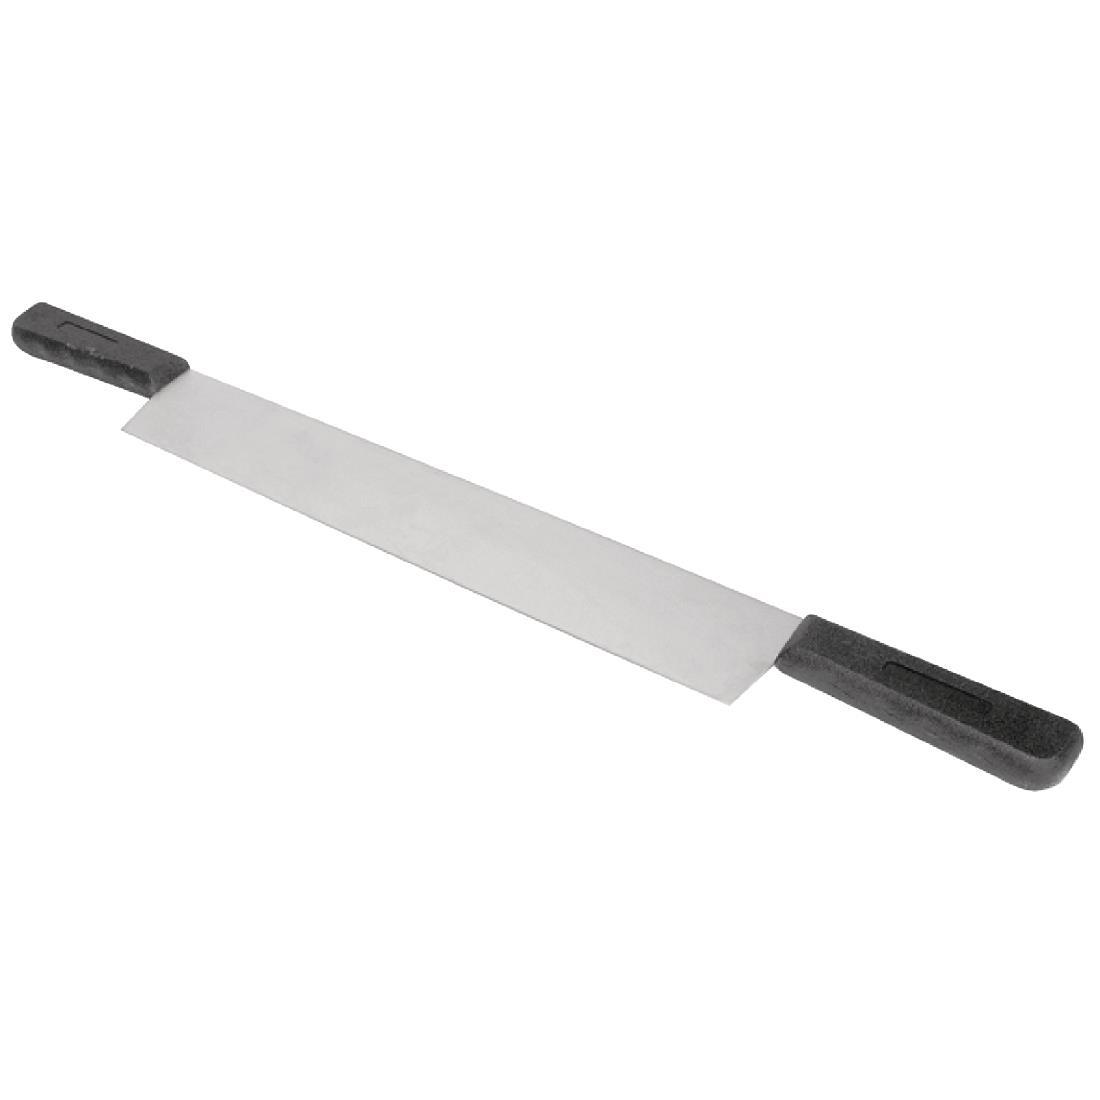 Vogue Double Handled Cheese Cutter 38cm - D440  - 1